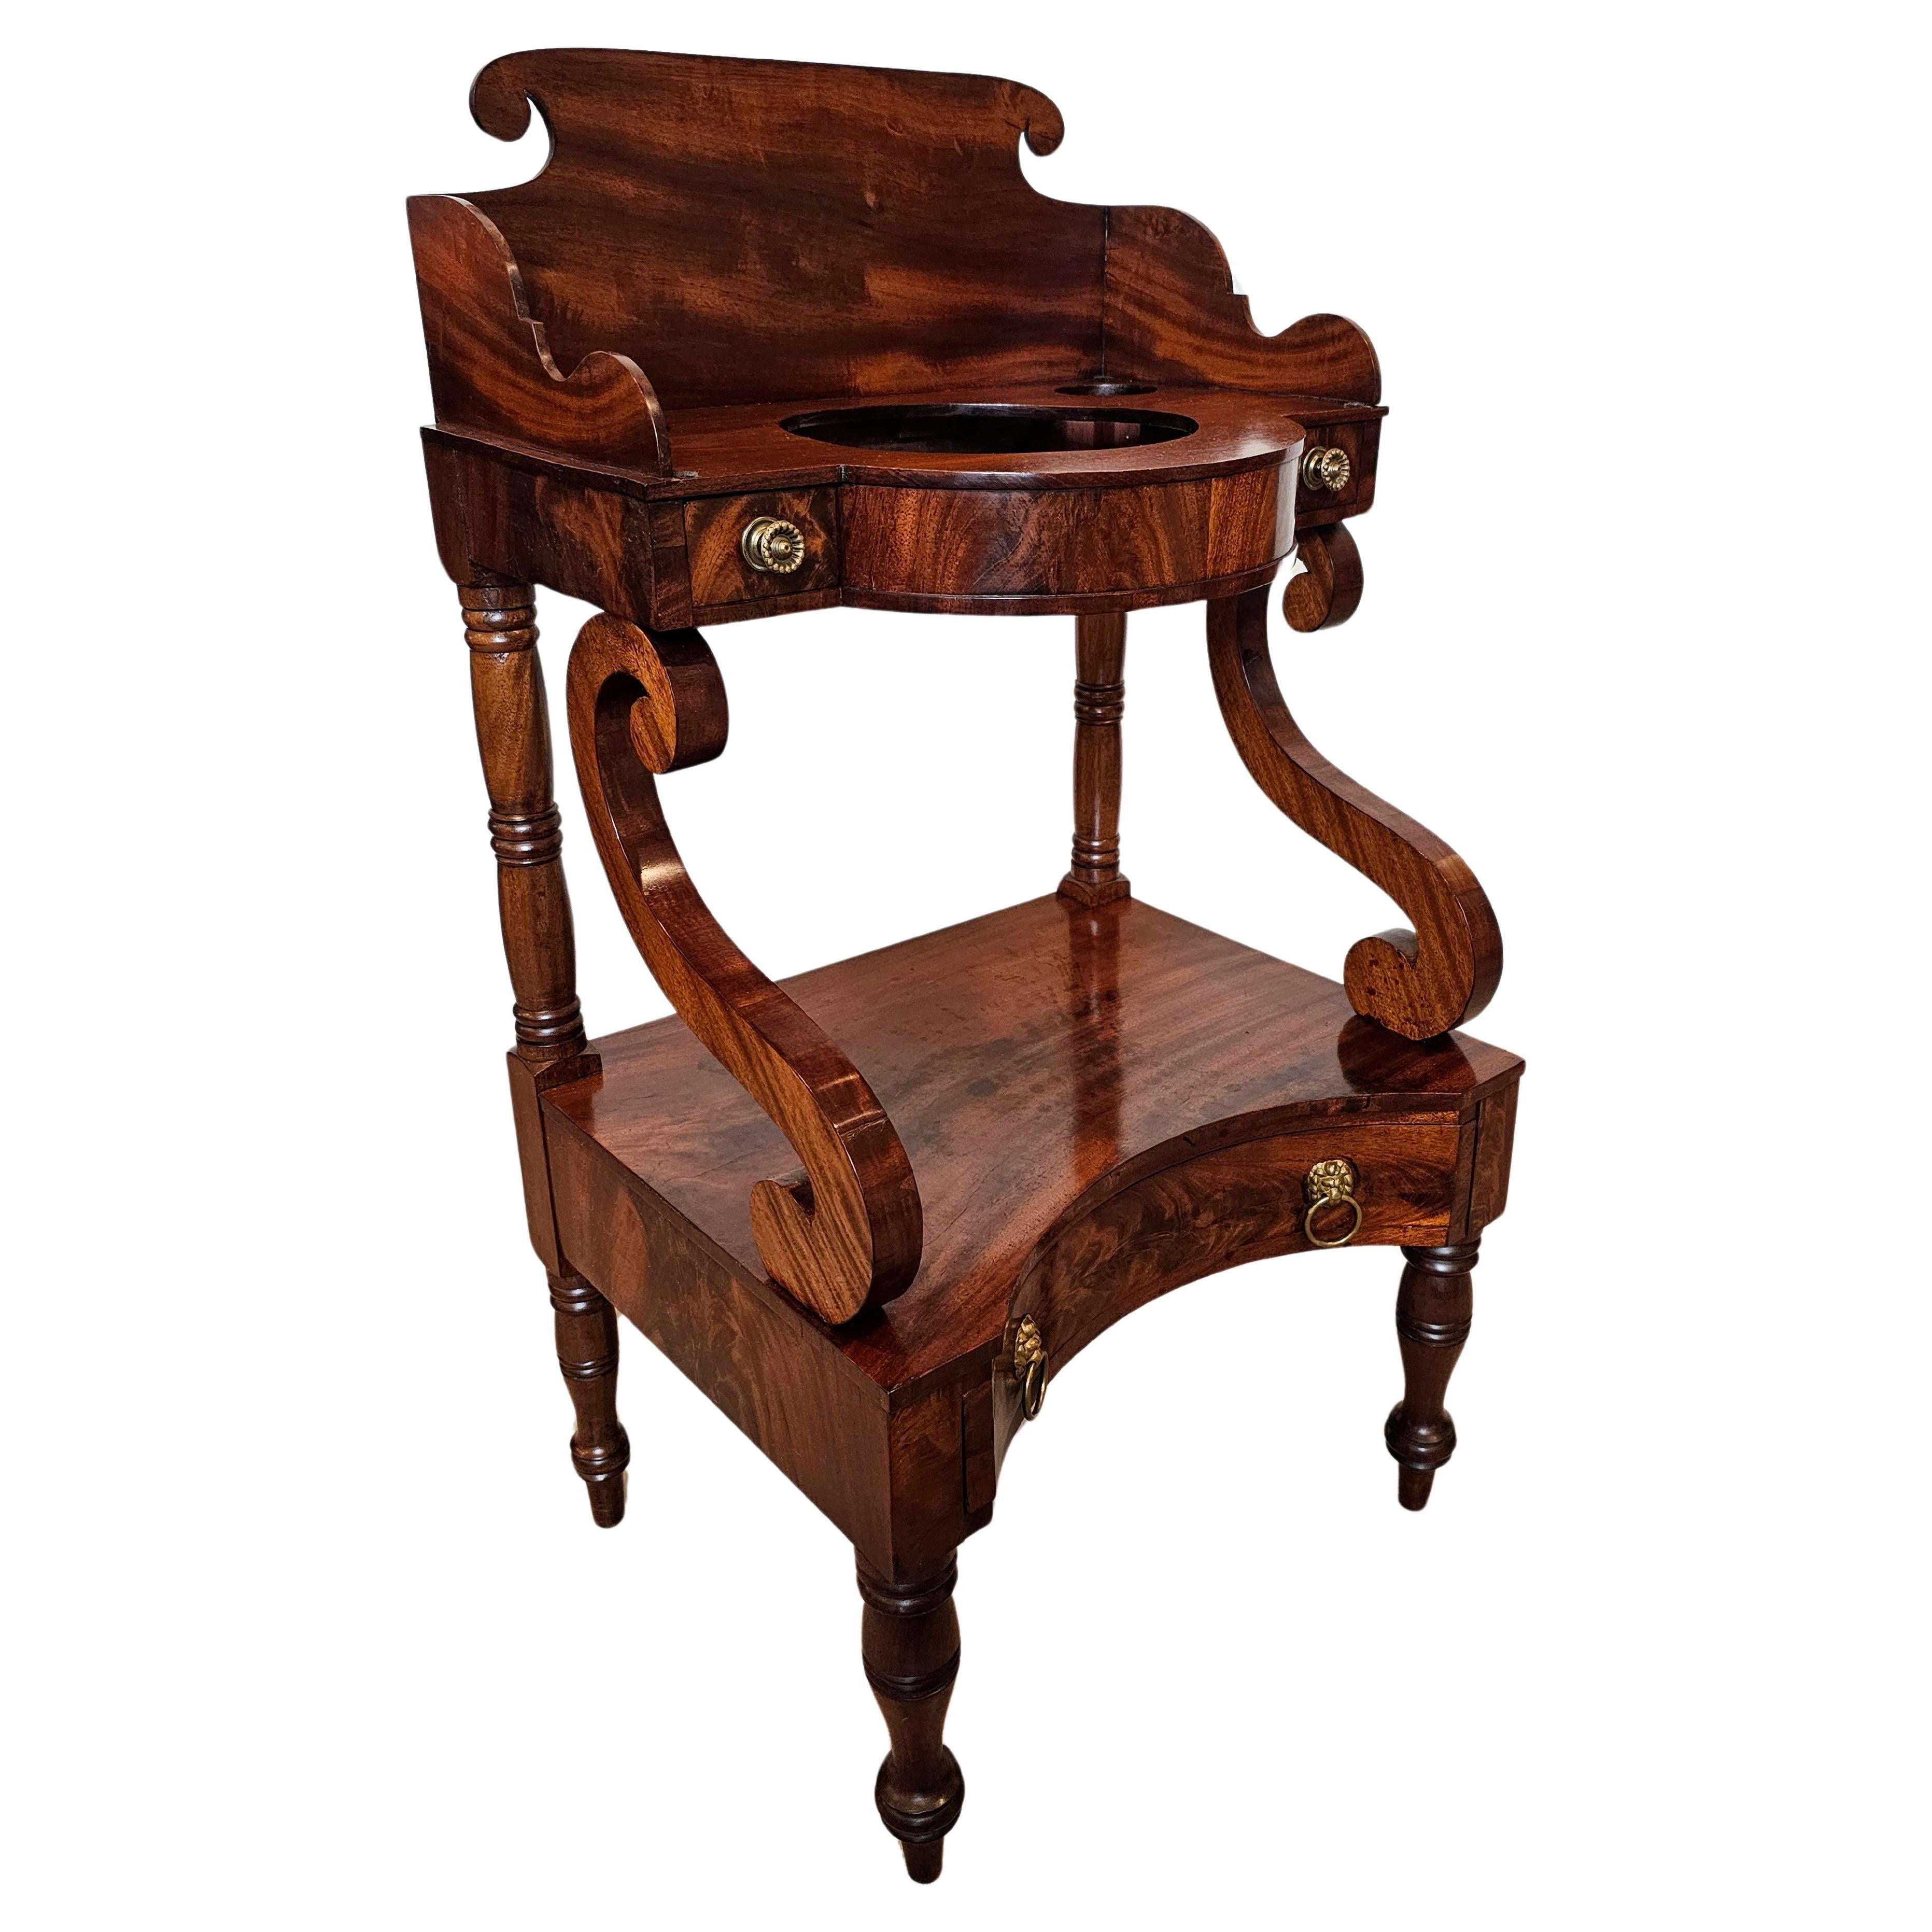 Early American Federal Period Flame Mahogany Antique Wash Stand  For Sale